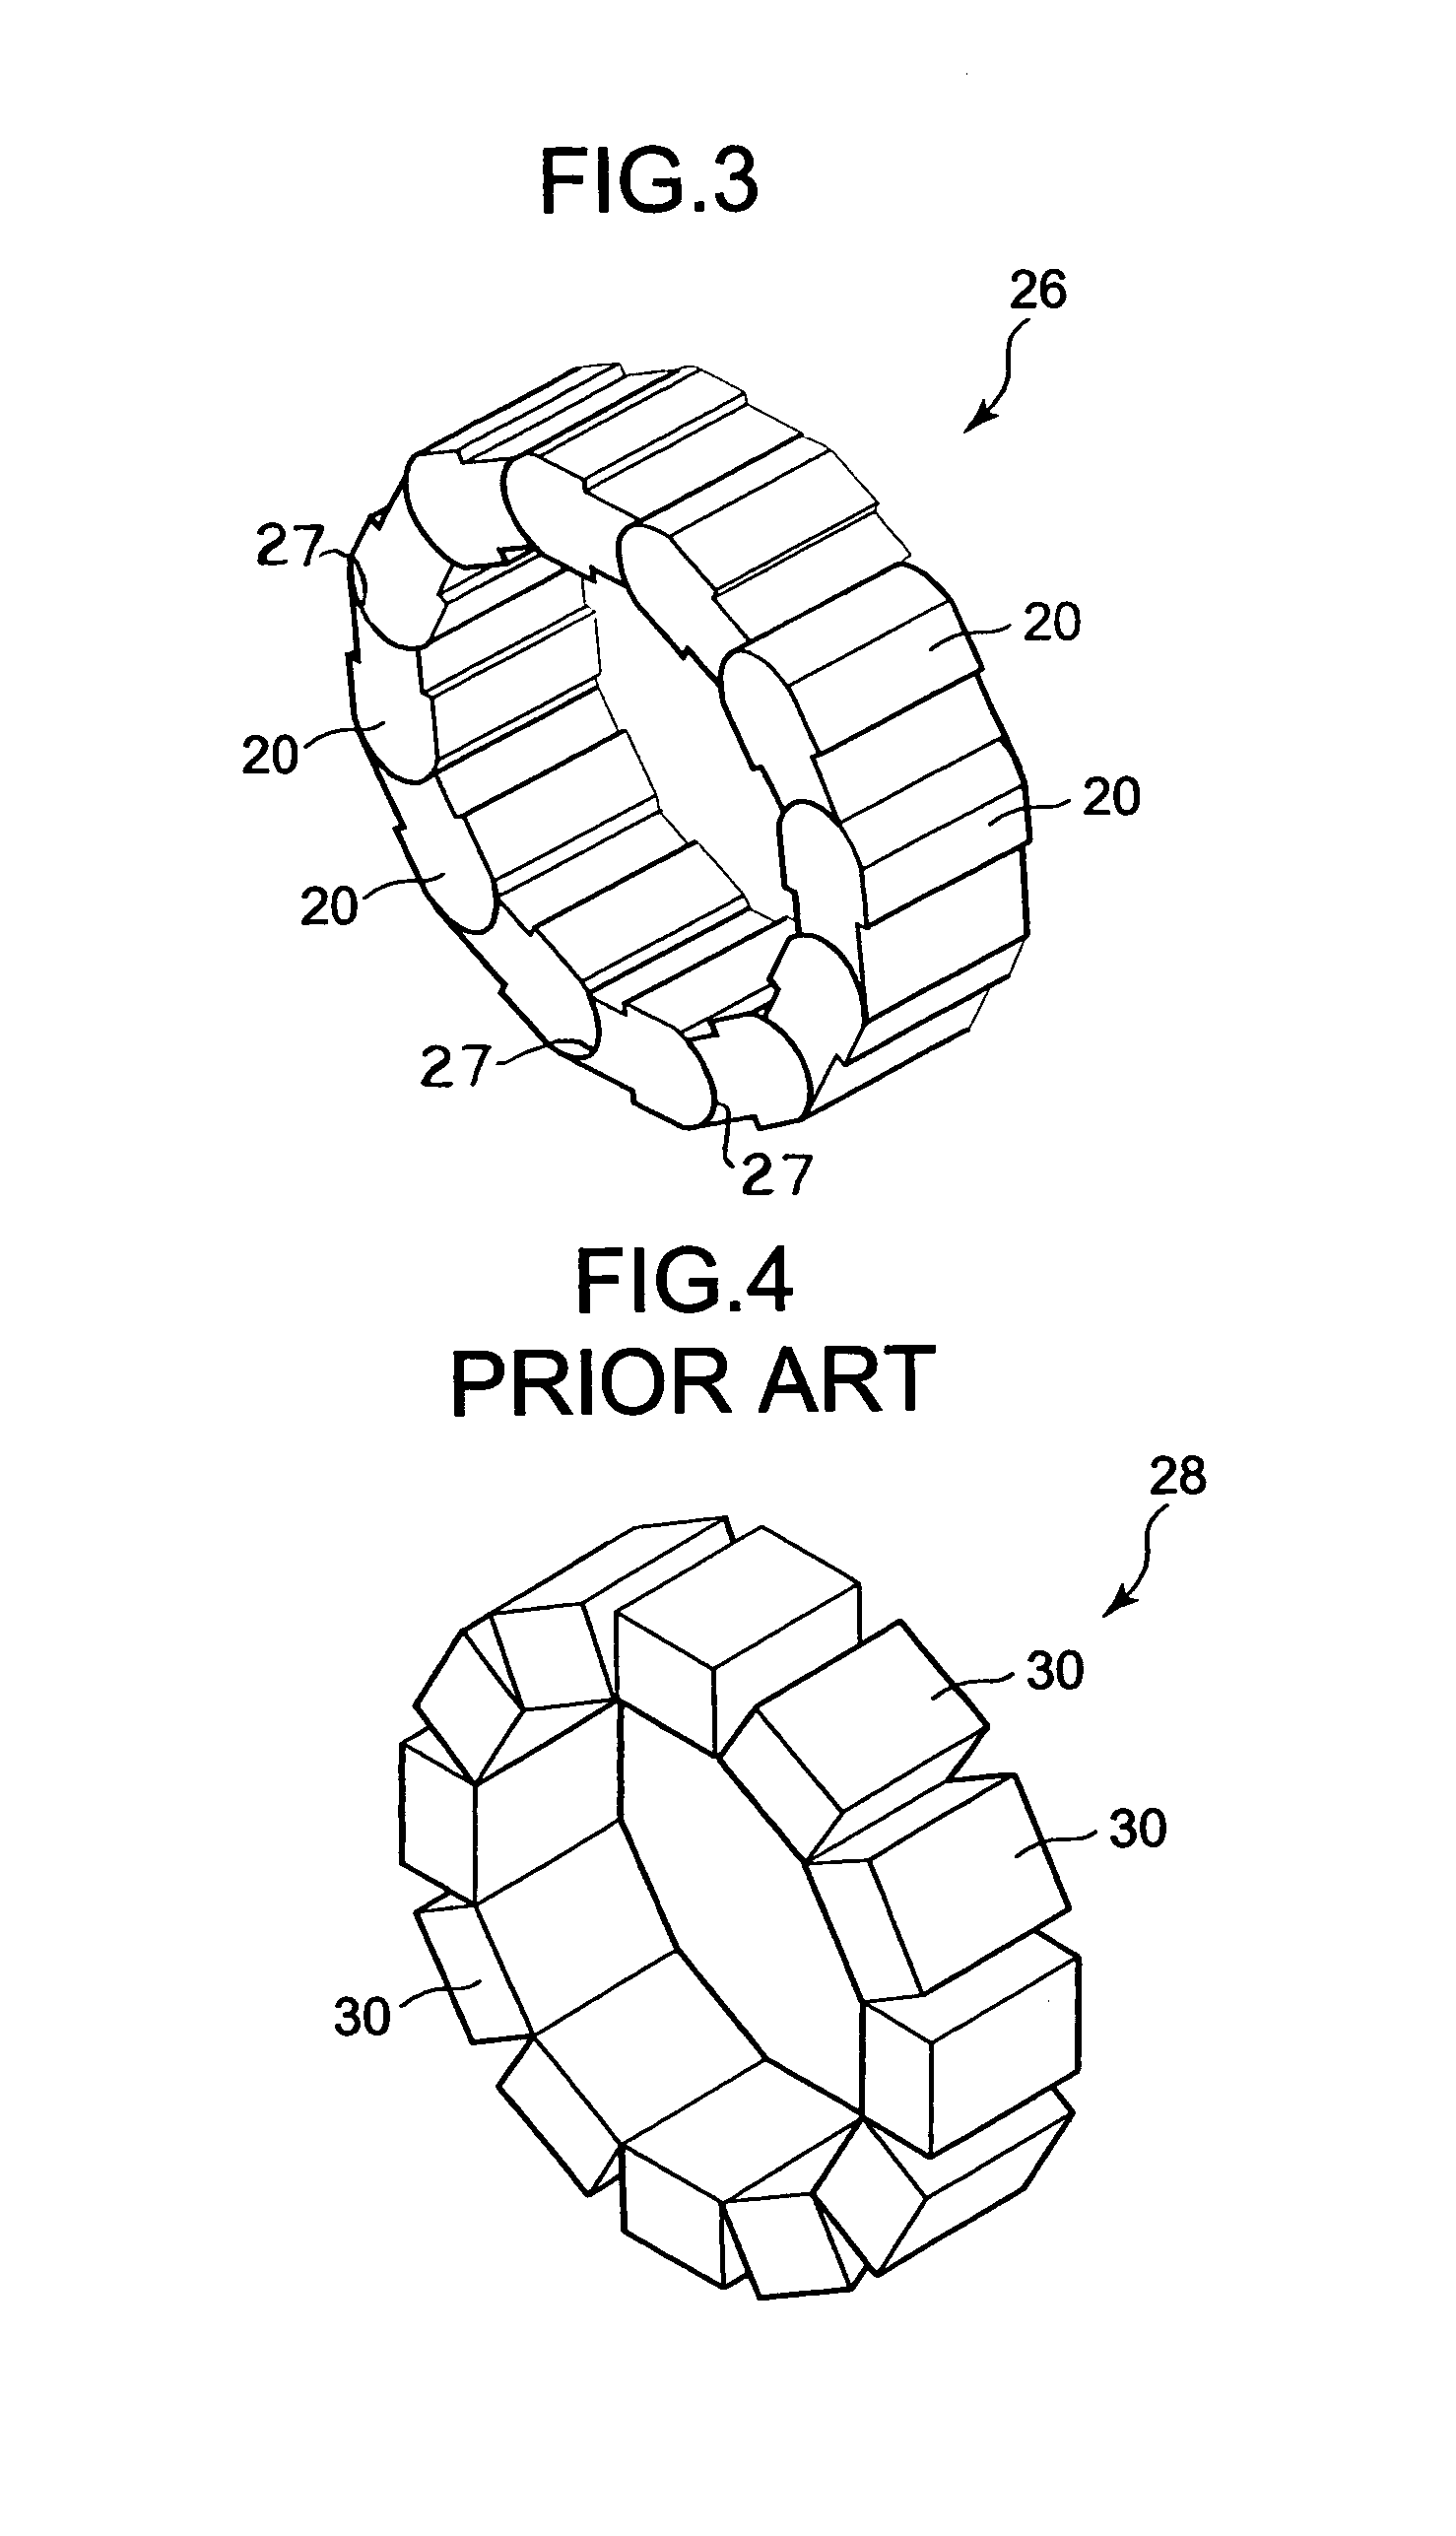 Ferrite core, and flexible assembly of ferrite cores for suppressing electromagnetic interference